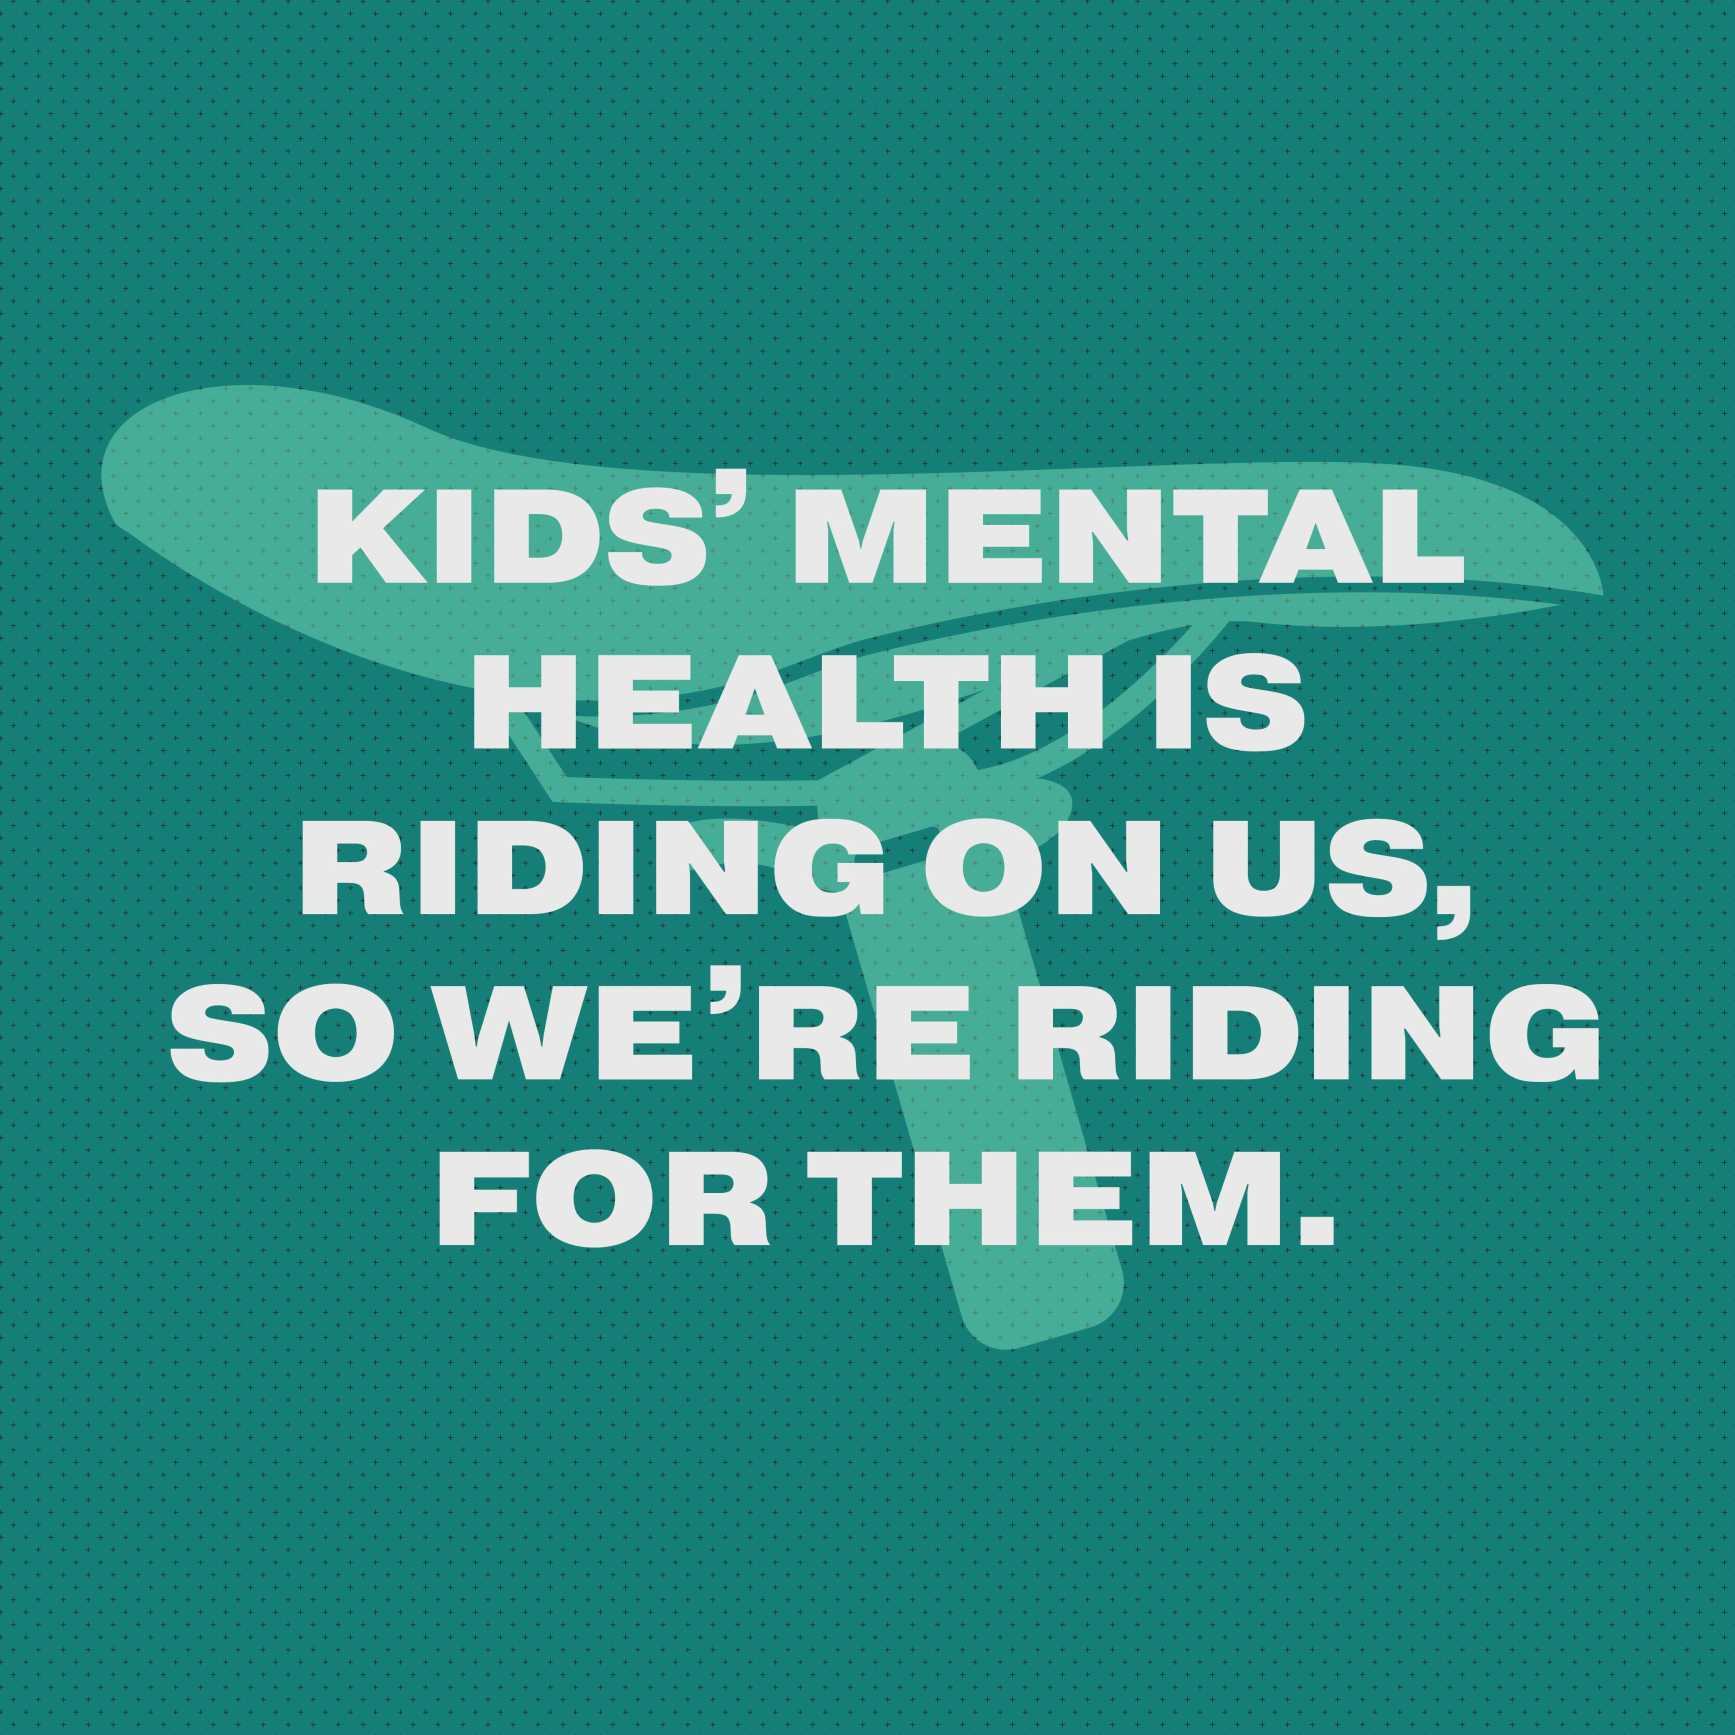 kids' mental health is riding on us...